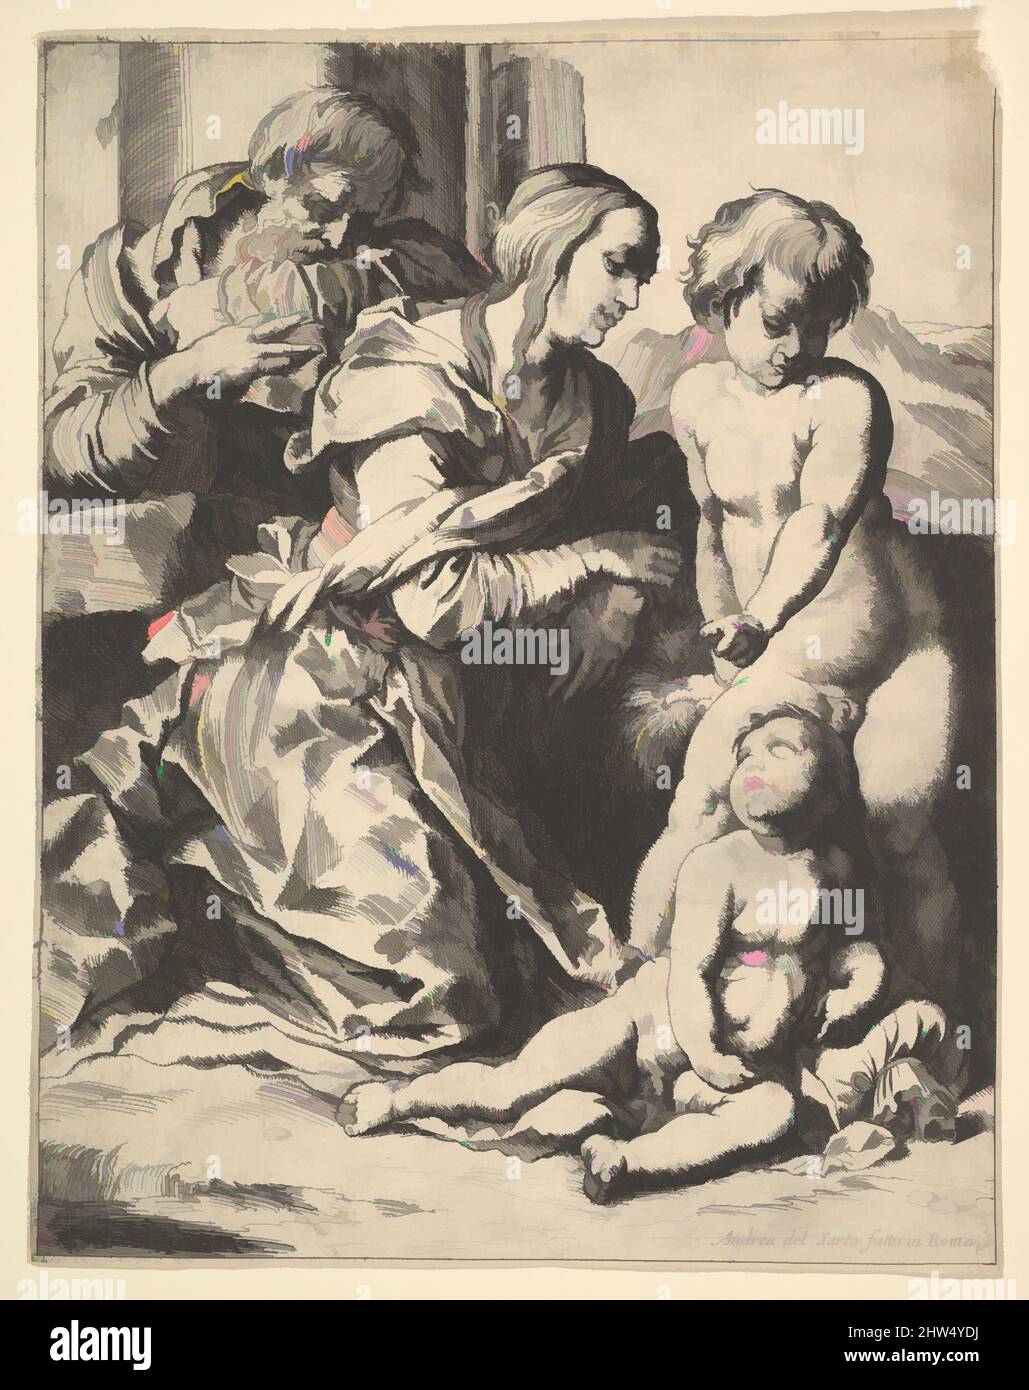 Art inspired by Virgin kneeling before Christ, 1610–42, Etching, Sheet: 8 15/16 x 7 1/8 in. (22.7 x 18.1cm), Prints, Pierre Brebiette (French, Mantes-sur-Seine ca. 1598–1642 Paris), Designed by Andrea del Sarto (Andrea d'Agnolo) (Italian, Florence 1486–1530 Florence, Classic works modernized by Artotop with a splash of modernity. Shapes, color and value, eye-catching visual impact on art. Emotions through freedom of artworks in a contemporary way. A timeless message pursuing a wildly creative new direction. Artists turning to the digital medium and creating the Artotop NFT Stock Photo